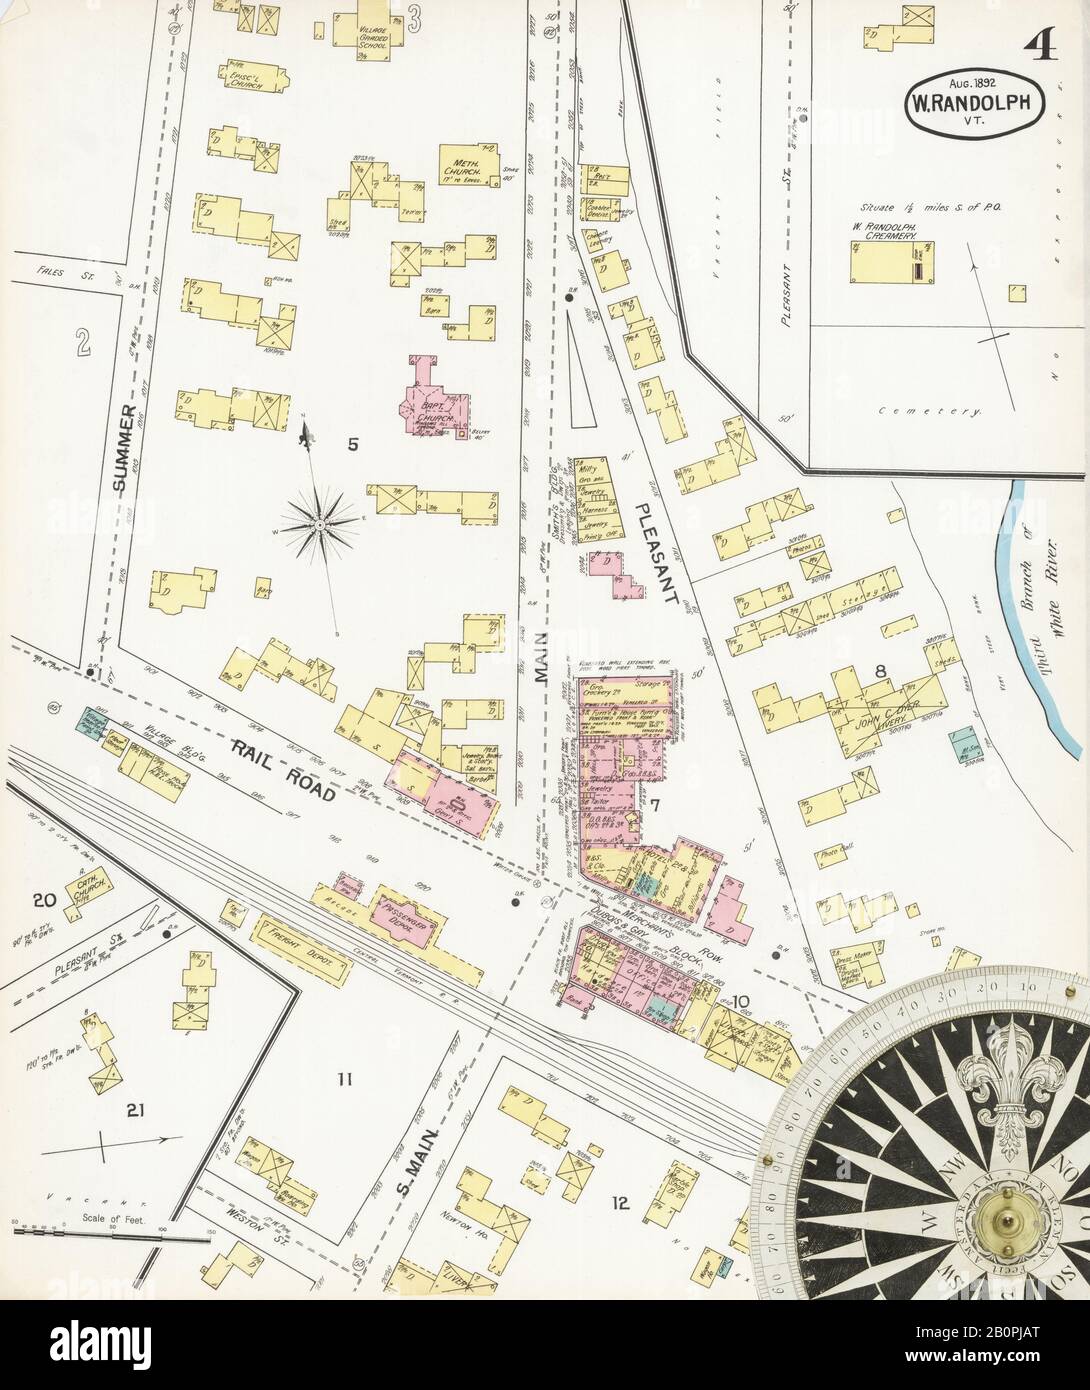 Image 4 of Sanborn Fire Insurance Map from West Randolph, Orange County, Vermont. Aug 1892. 4 Sheet(s), America, street map with a Nineteenth Century compass Stock Photo